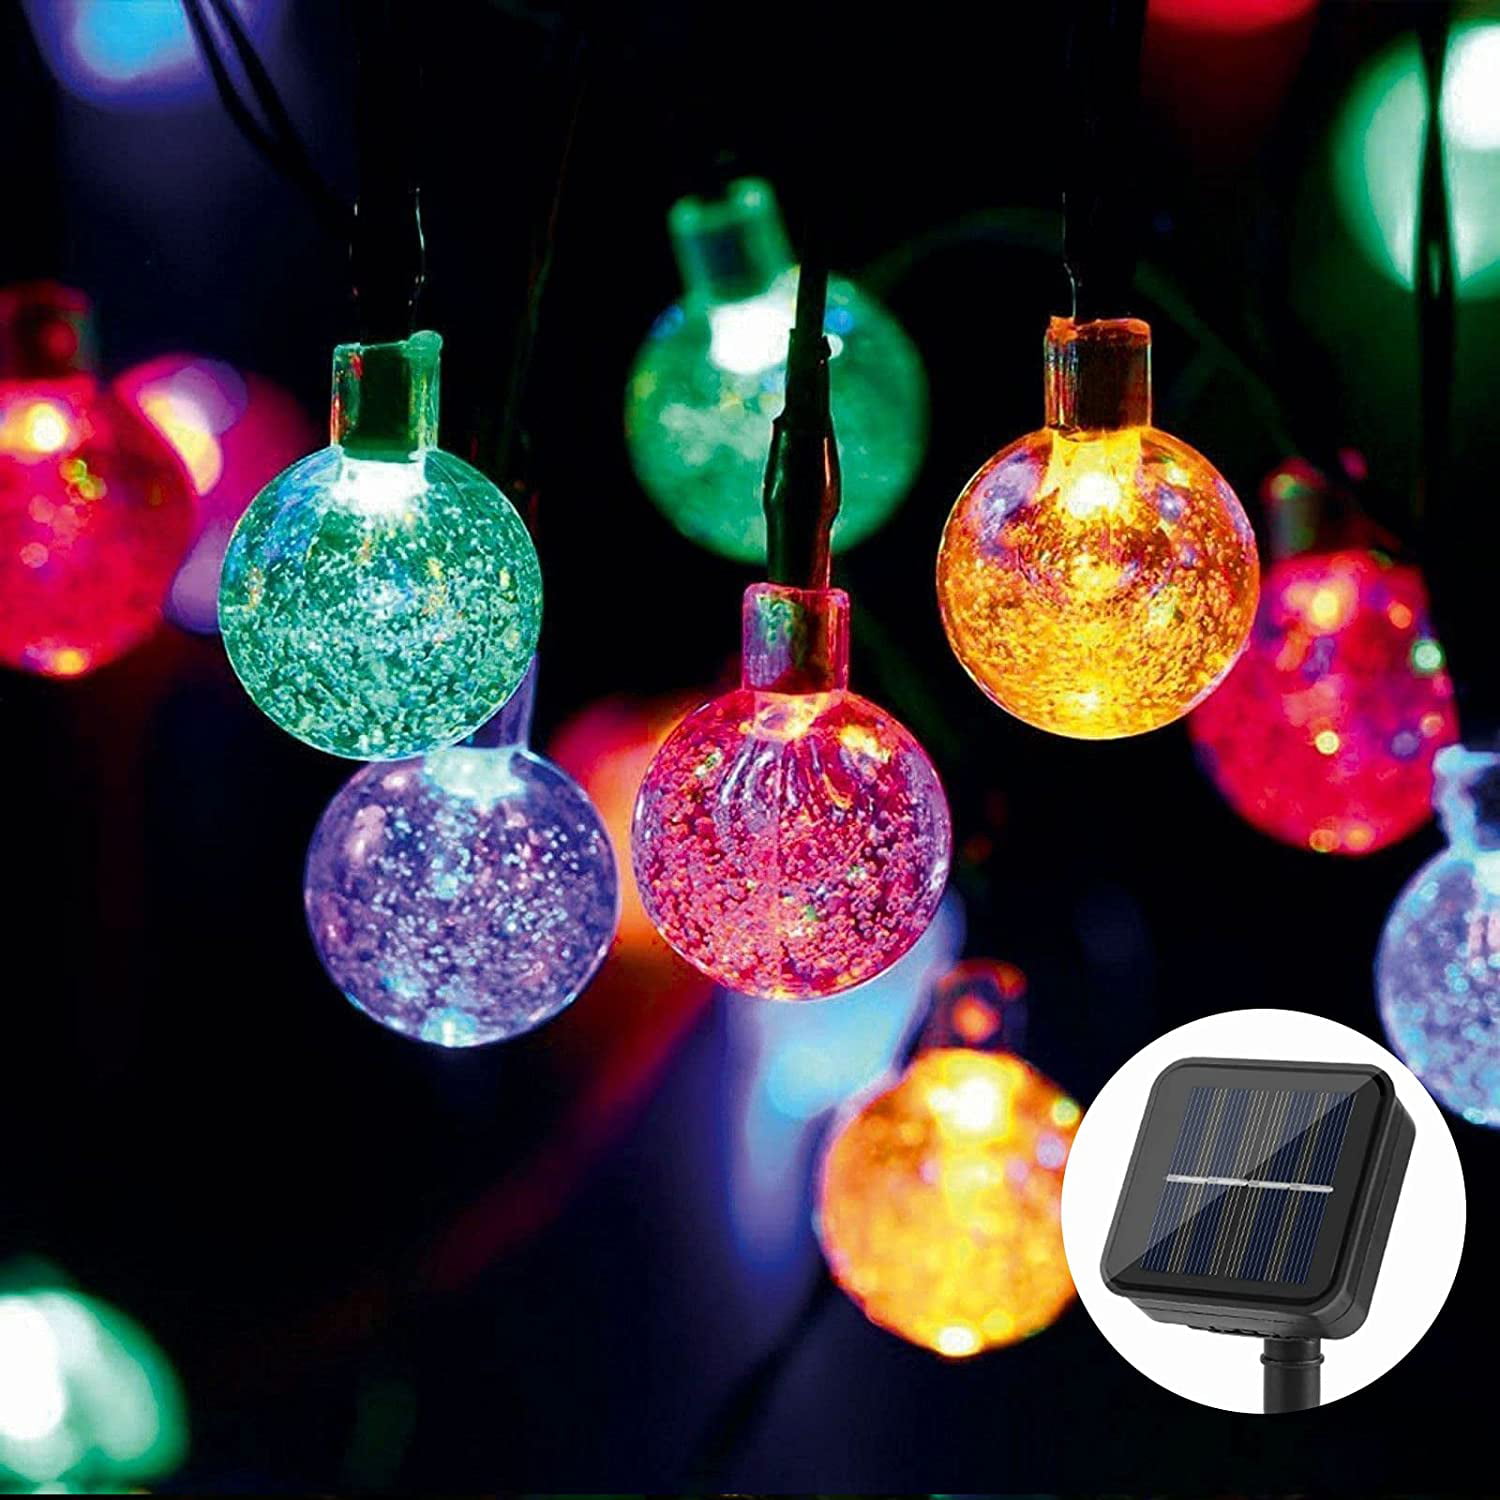 UK 30 LED Solar Powered Garden Outdoor Party Fairy String Crystal Ball Lights